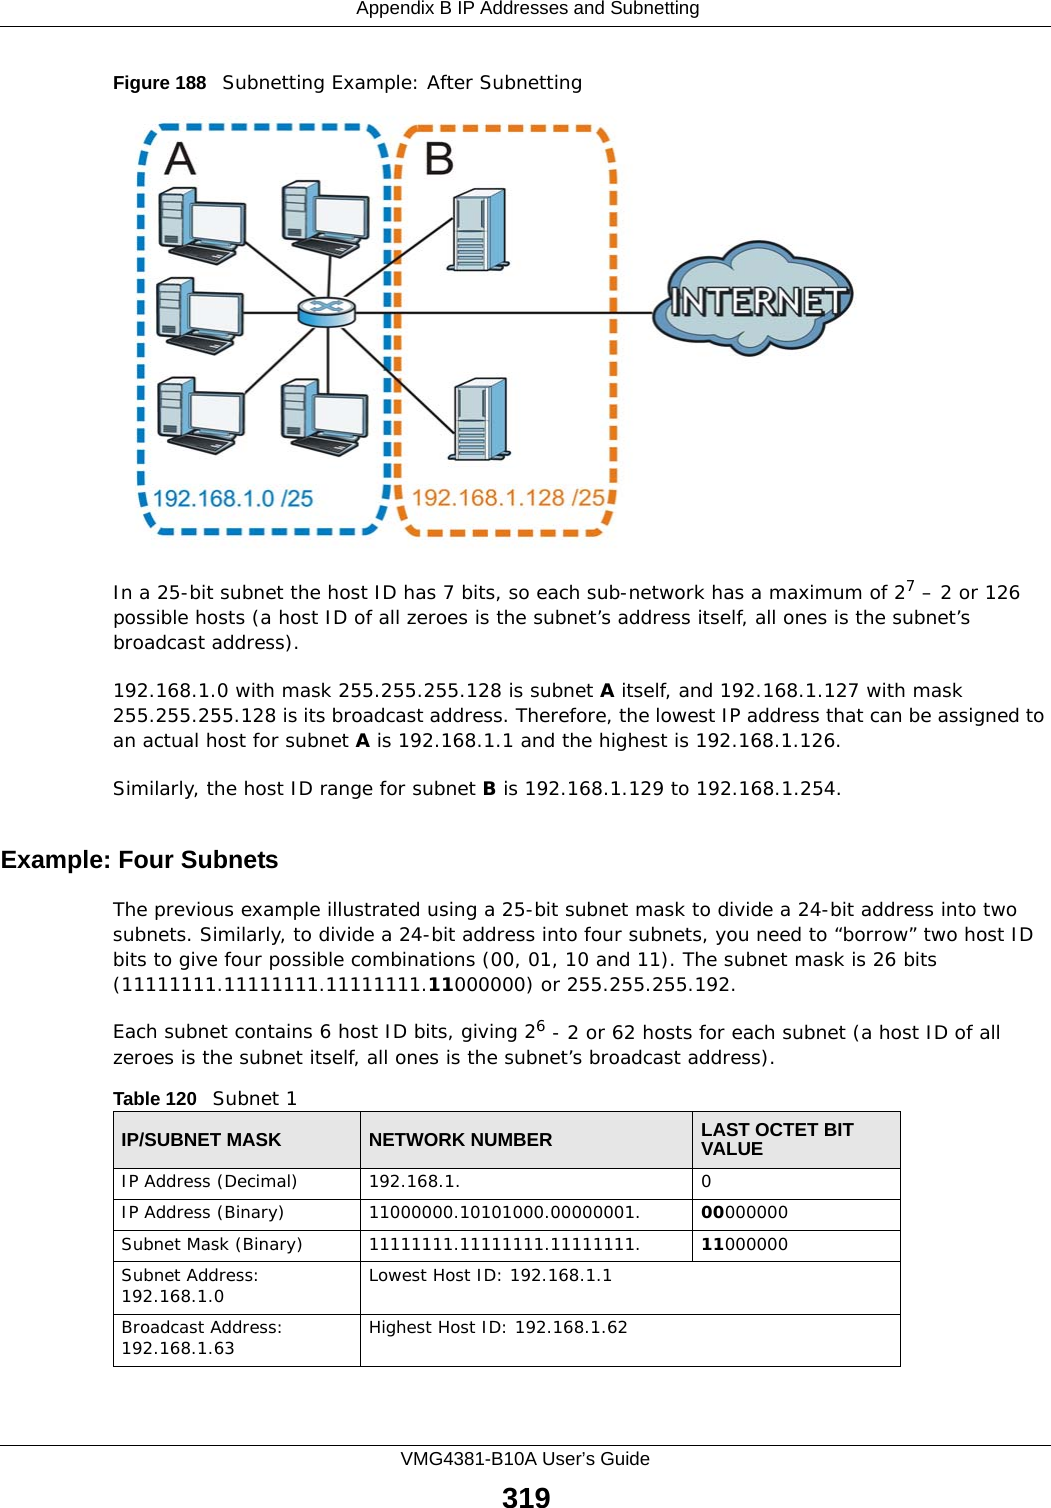  Appendix B IP Addresses and SubnettingVMG4381-B10A User’s Guide319Figure 188   Subnetting Example: After SubnettingIn a 25-bit subnet the host ID has 7 bits, so each sub-network has a maximum of 27 – 2 or 126 possible hosts (a host ID of all zeroes is the subnet’s address itself, all ones is the subnet’s broadcast address).192.168.1.0 with mask 255.255.255.128 is subnet A itself, and 192.168.1.127 with mask 255.255.255.128 is its broadcast address. Therefore, the lowest IP address that can be assigned to an actual host for subnet A is 192.168.1.1 and the highest is 192.168.1.126. Similarly, the host ID range for subnet B is 192.168.1.129 to 192.168.1.254.Example: Four Subnets The previous example illustrated using a 25-bit subnet mask to divide a 24-bit address into two subnets. Similarly, to divide a 24-bit address into four subnets, you need to “borrow” two host ID bits to give four possible combinations (00, 01, 10 and 11). The subnet mask is 26 bits (11111111.11111111.11111111.11000000) or 255.255.255.192. Each subnet contains 6 host ID bits, giving 26 - 2 or 62 hosts for each subnet (a host ID of all zeroes is the subnet itself, all ones is the subnet’s broadcast address). Table 120   Subnet 1IP/SUBNET MASK NETWORK NUMBER LAST OCTET BIT VALUEIP Address (Decimal) 192.168.1. 0IP Address (Binary) 11000000.10101000.00000001. 00000000Subnet Mask (Binary) 11111111.11111111.11111111. 11000000Subnet Address: 192.168.1.0 Lowest Host ID: 192.168.1.1Broadcast Address: 192.168.1.63 Highest Host ID: 192.168.1.62